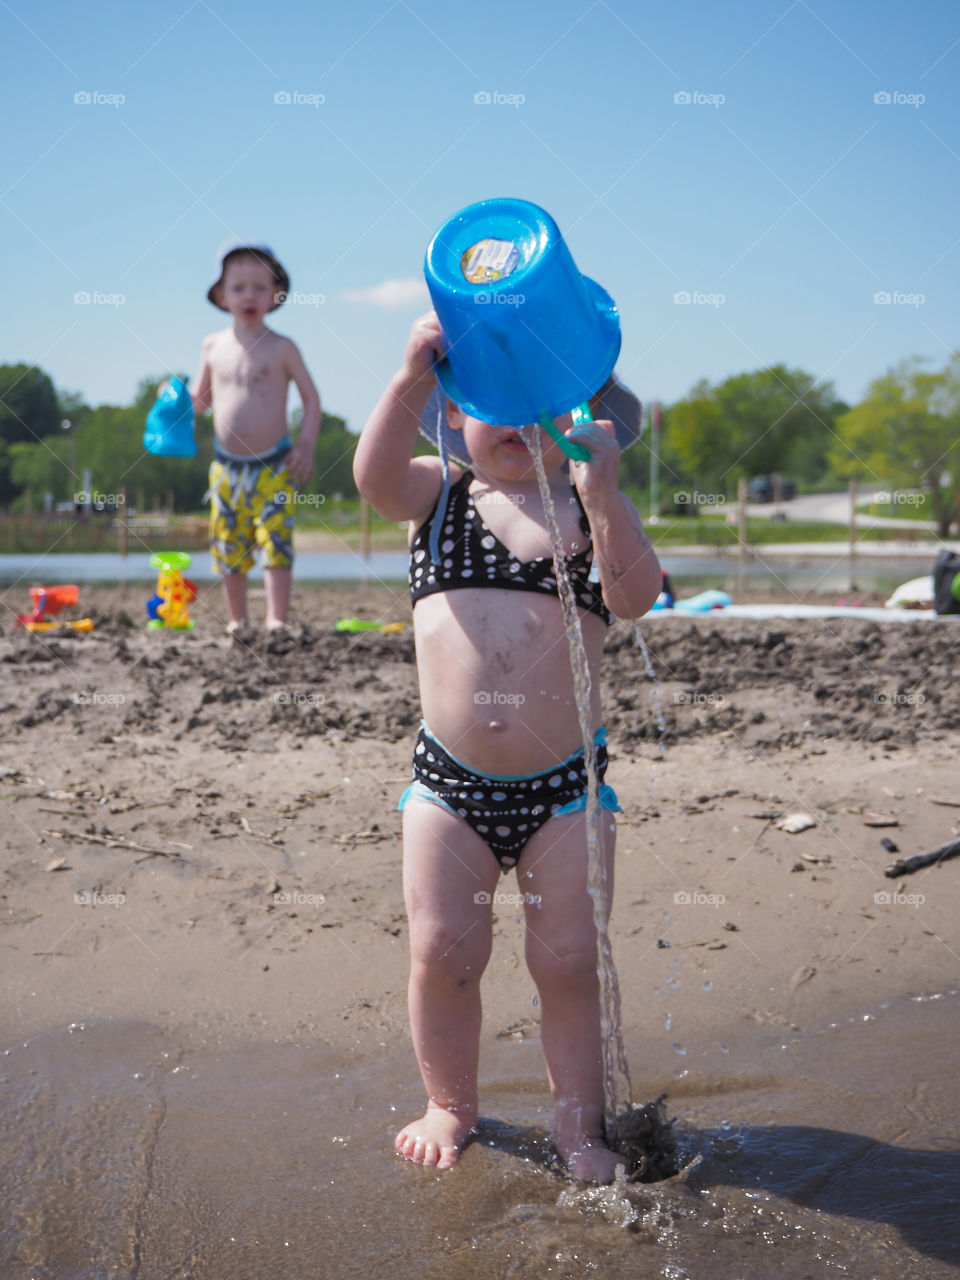 Toddler girl pours water on herself from bucket at the beach while brother watches in awe.